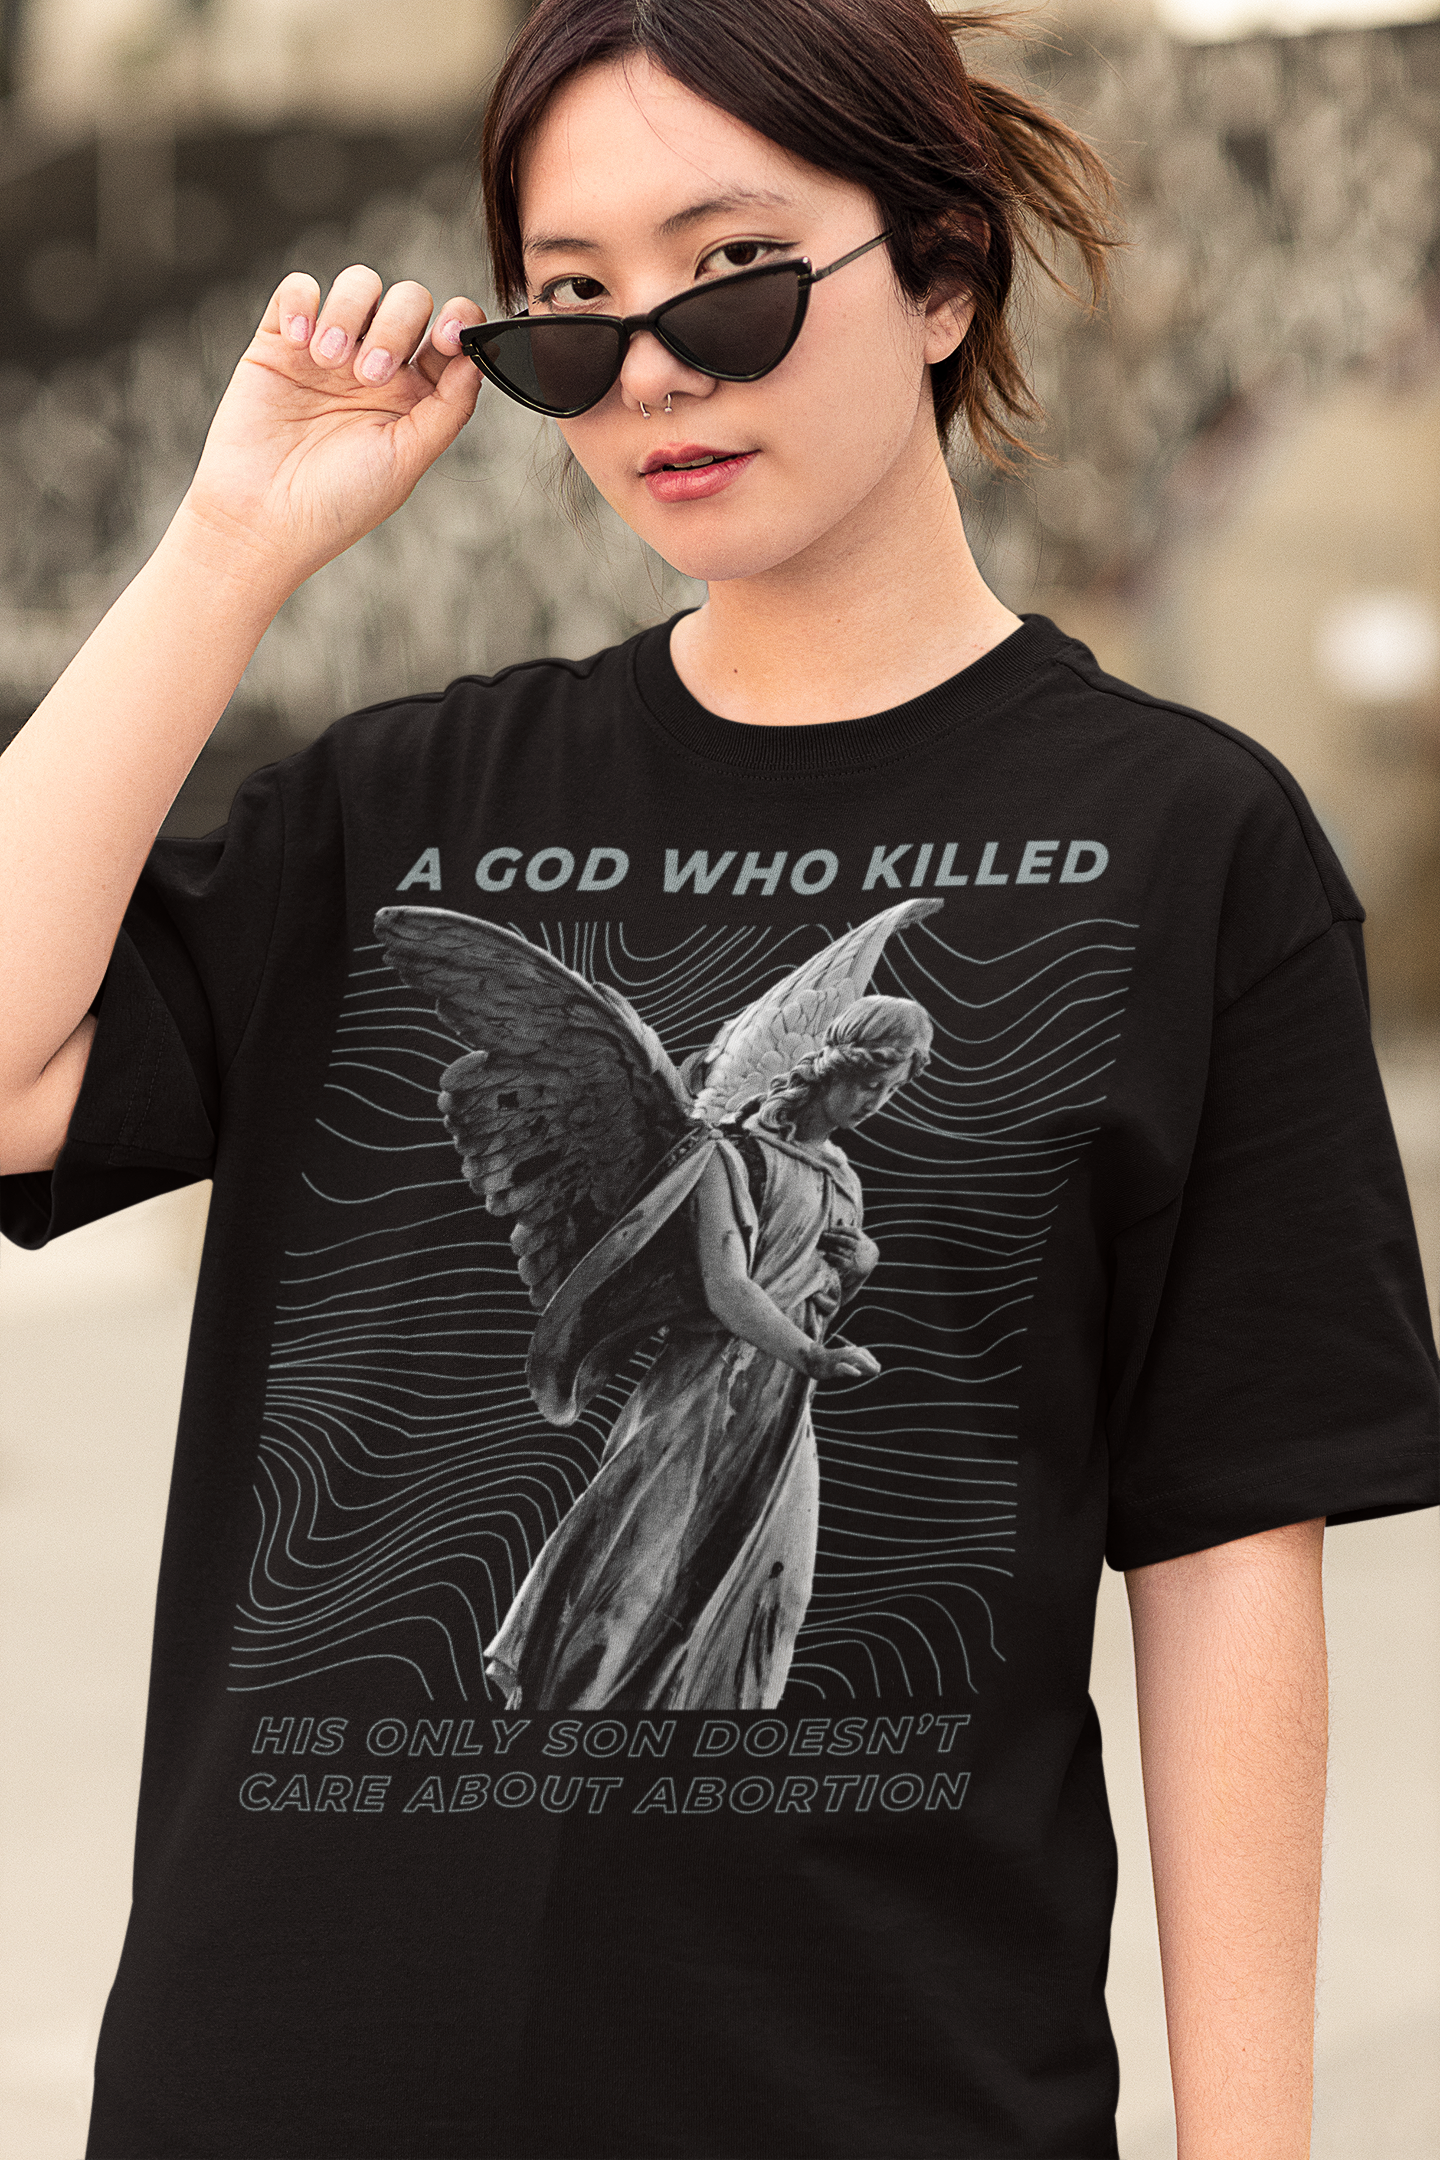 A God Who Killed His Own Son Doesn’t Care About Abortion Unisex Black Oversised  Feminist T-shirt - Feminist Trash Store - Shop Women’s Rights T- Shirts